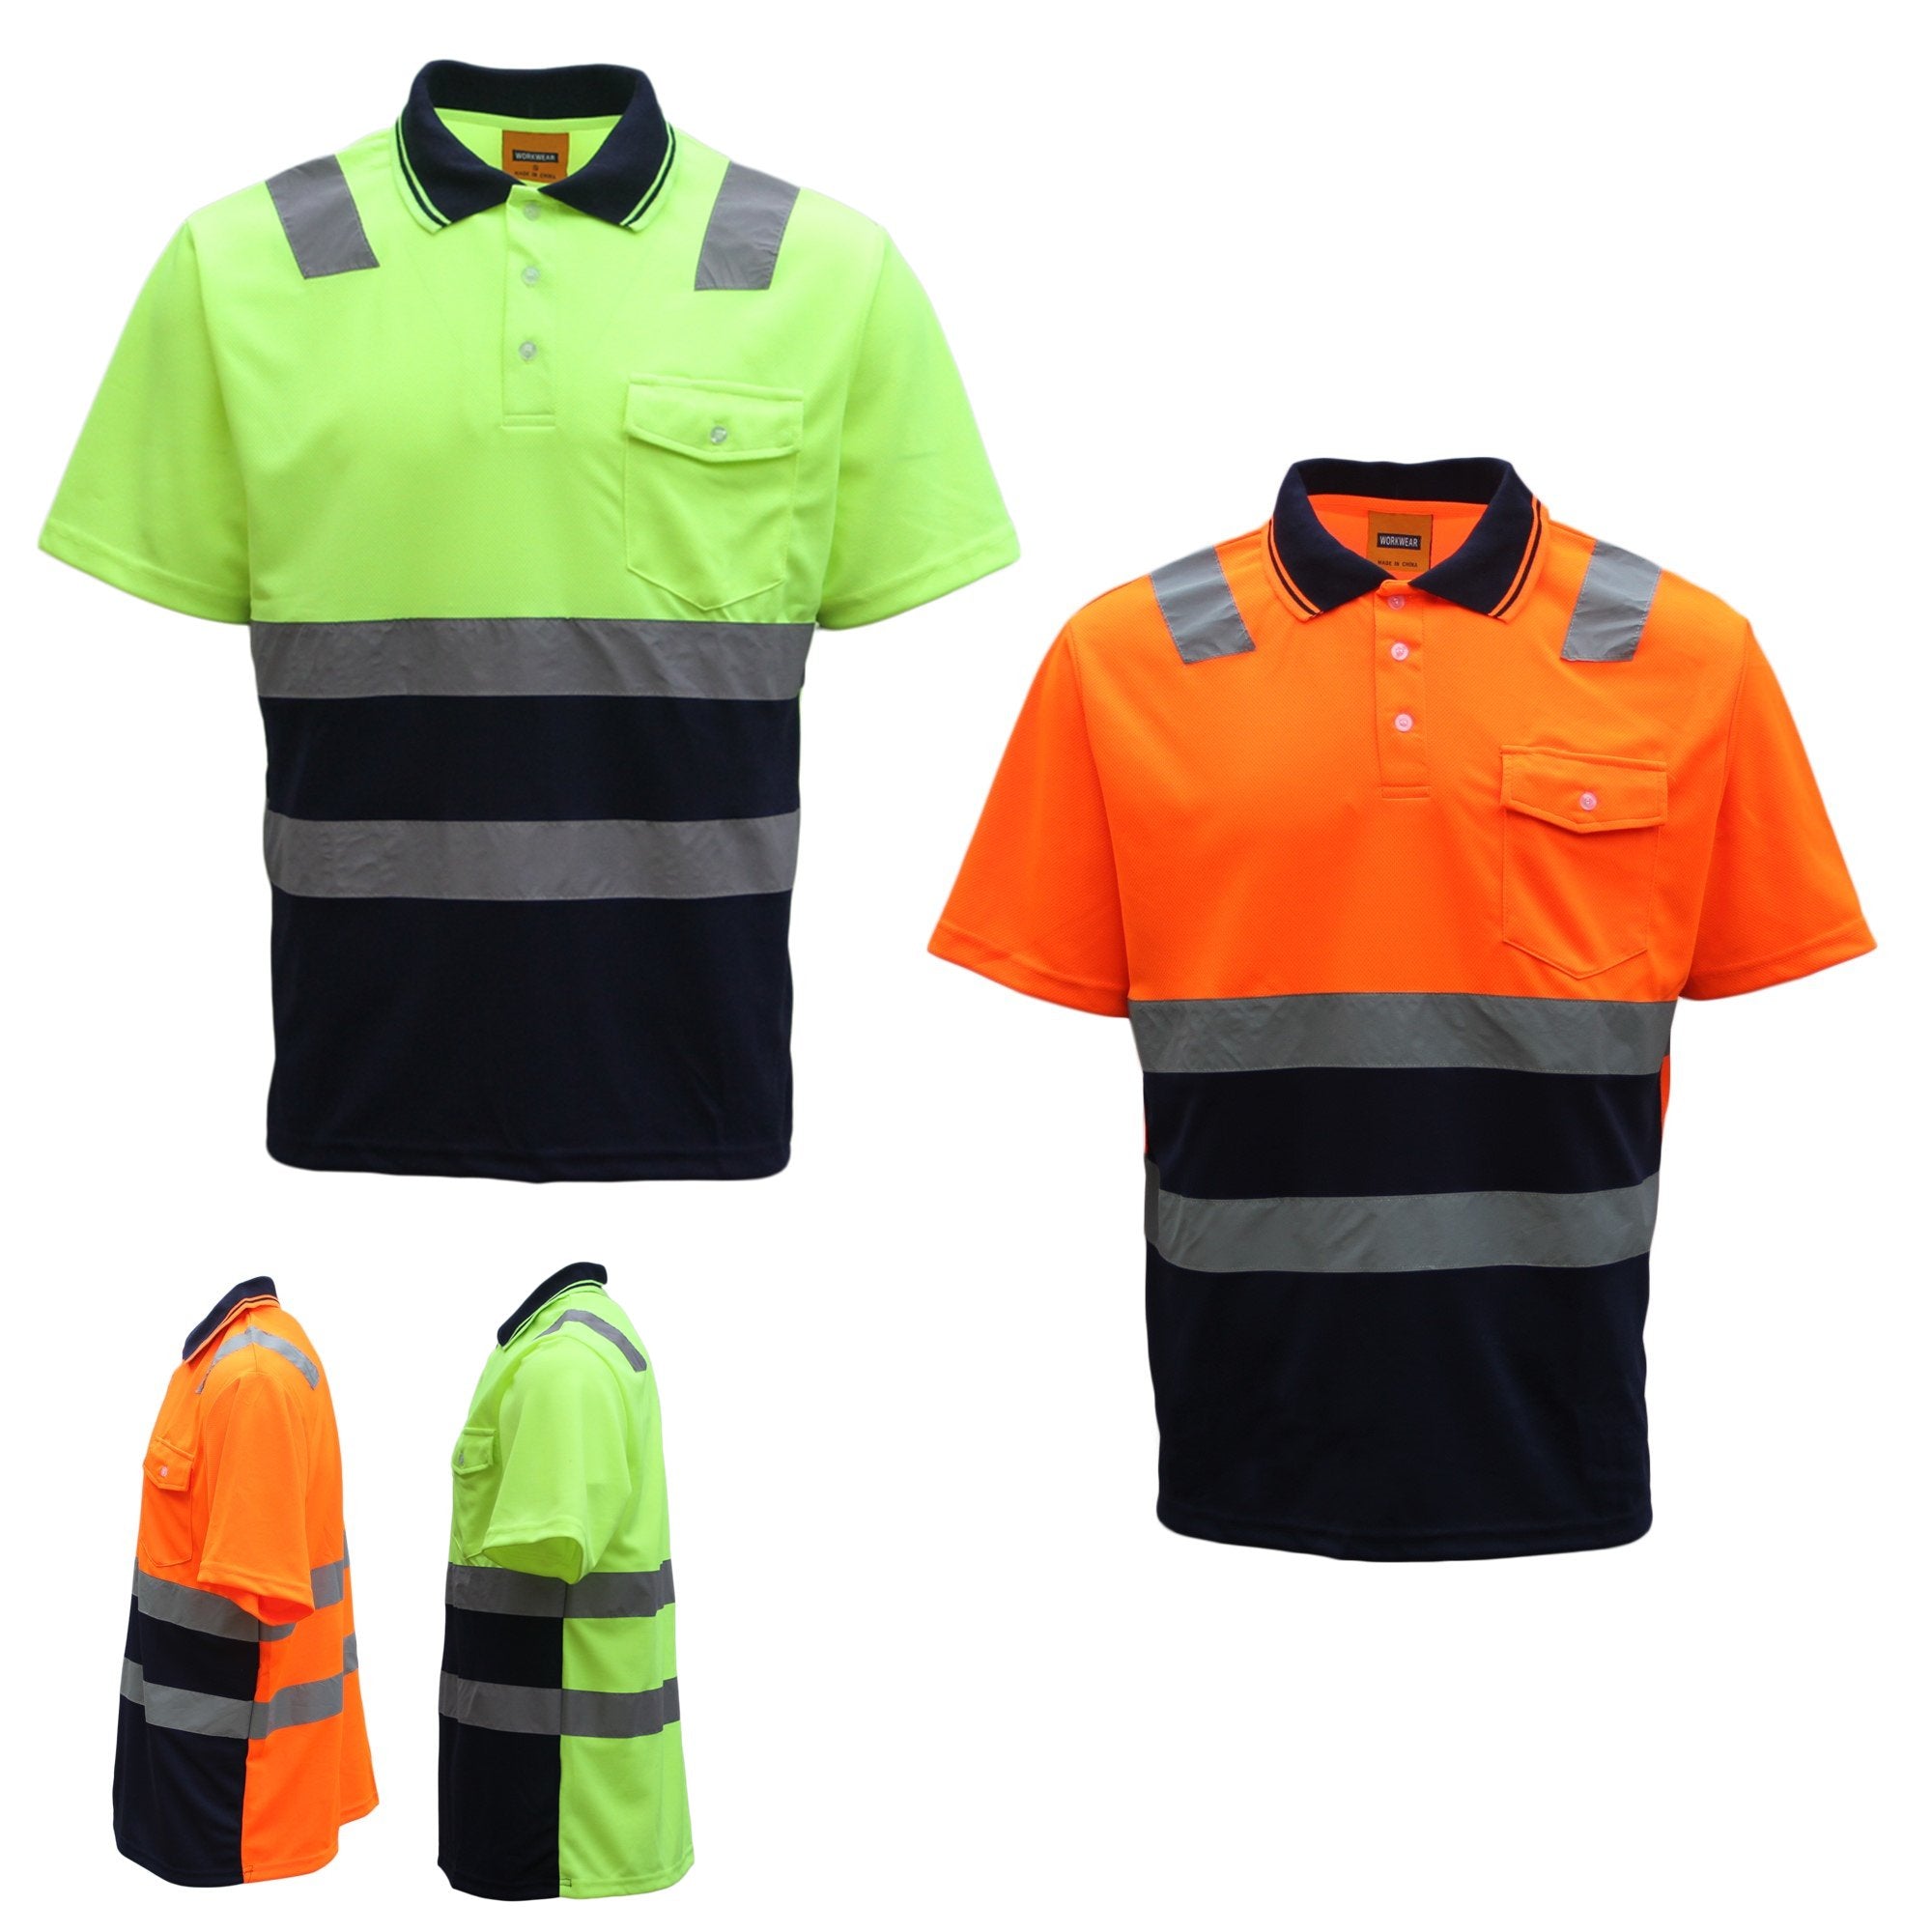 HI VIS Short Sleeve Workwear Shirt w Reflective Tape Cool Dry Safety Polo 2 Tone, Fluoro Yellow / Navy, XS